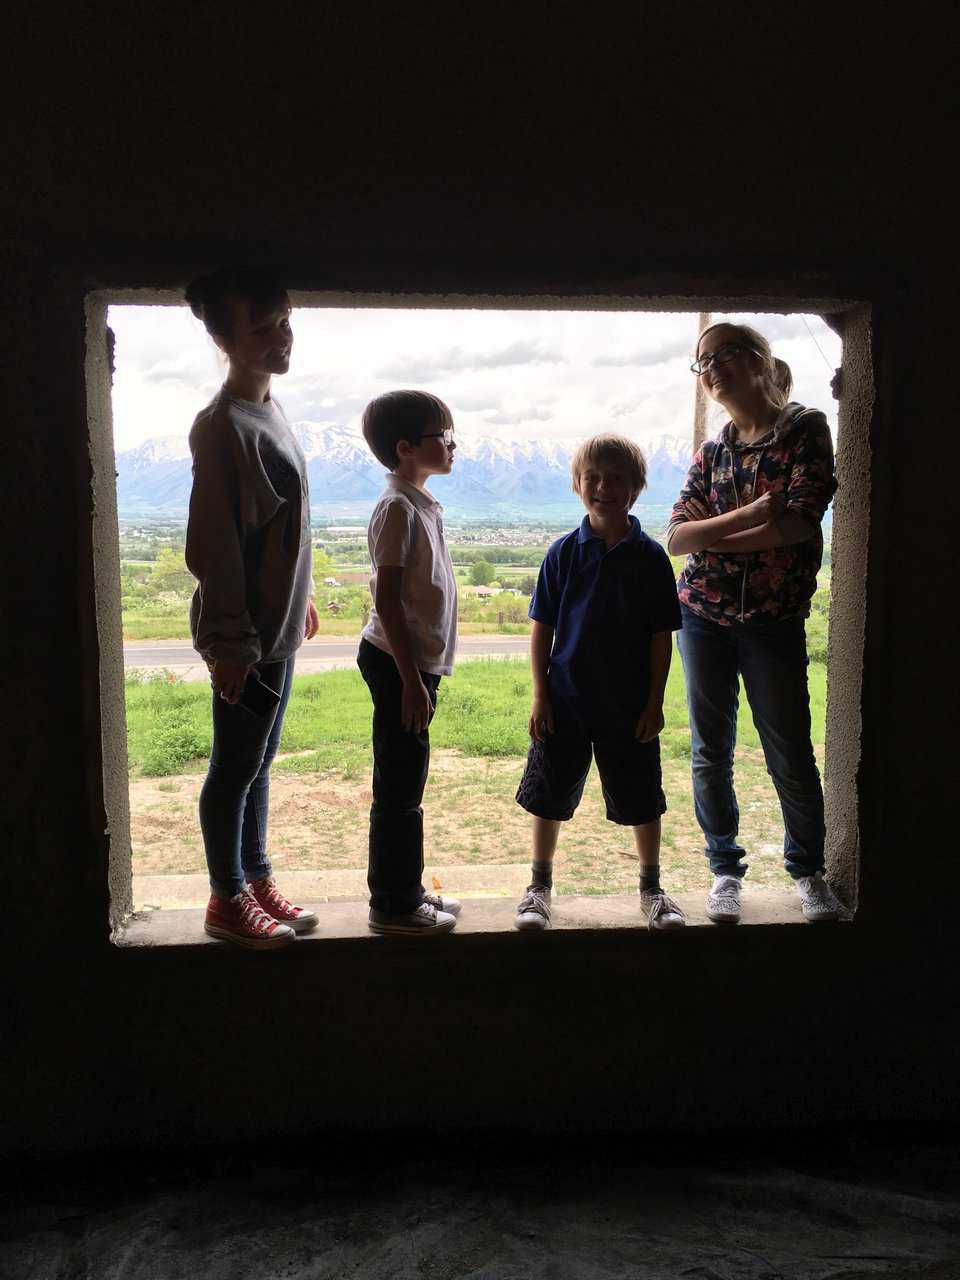 Amy, Sam, Tom and Aubrey sizing up the large window in the sun room with its view of the valley and mountains in the west.